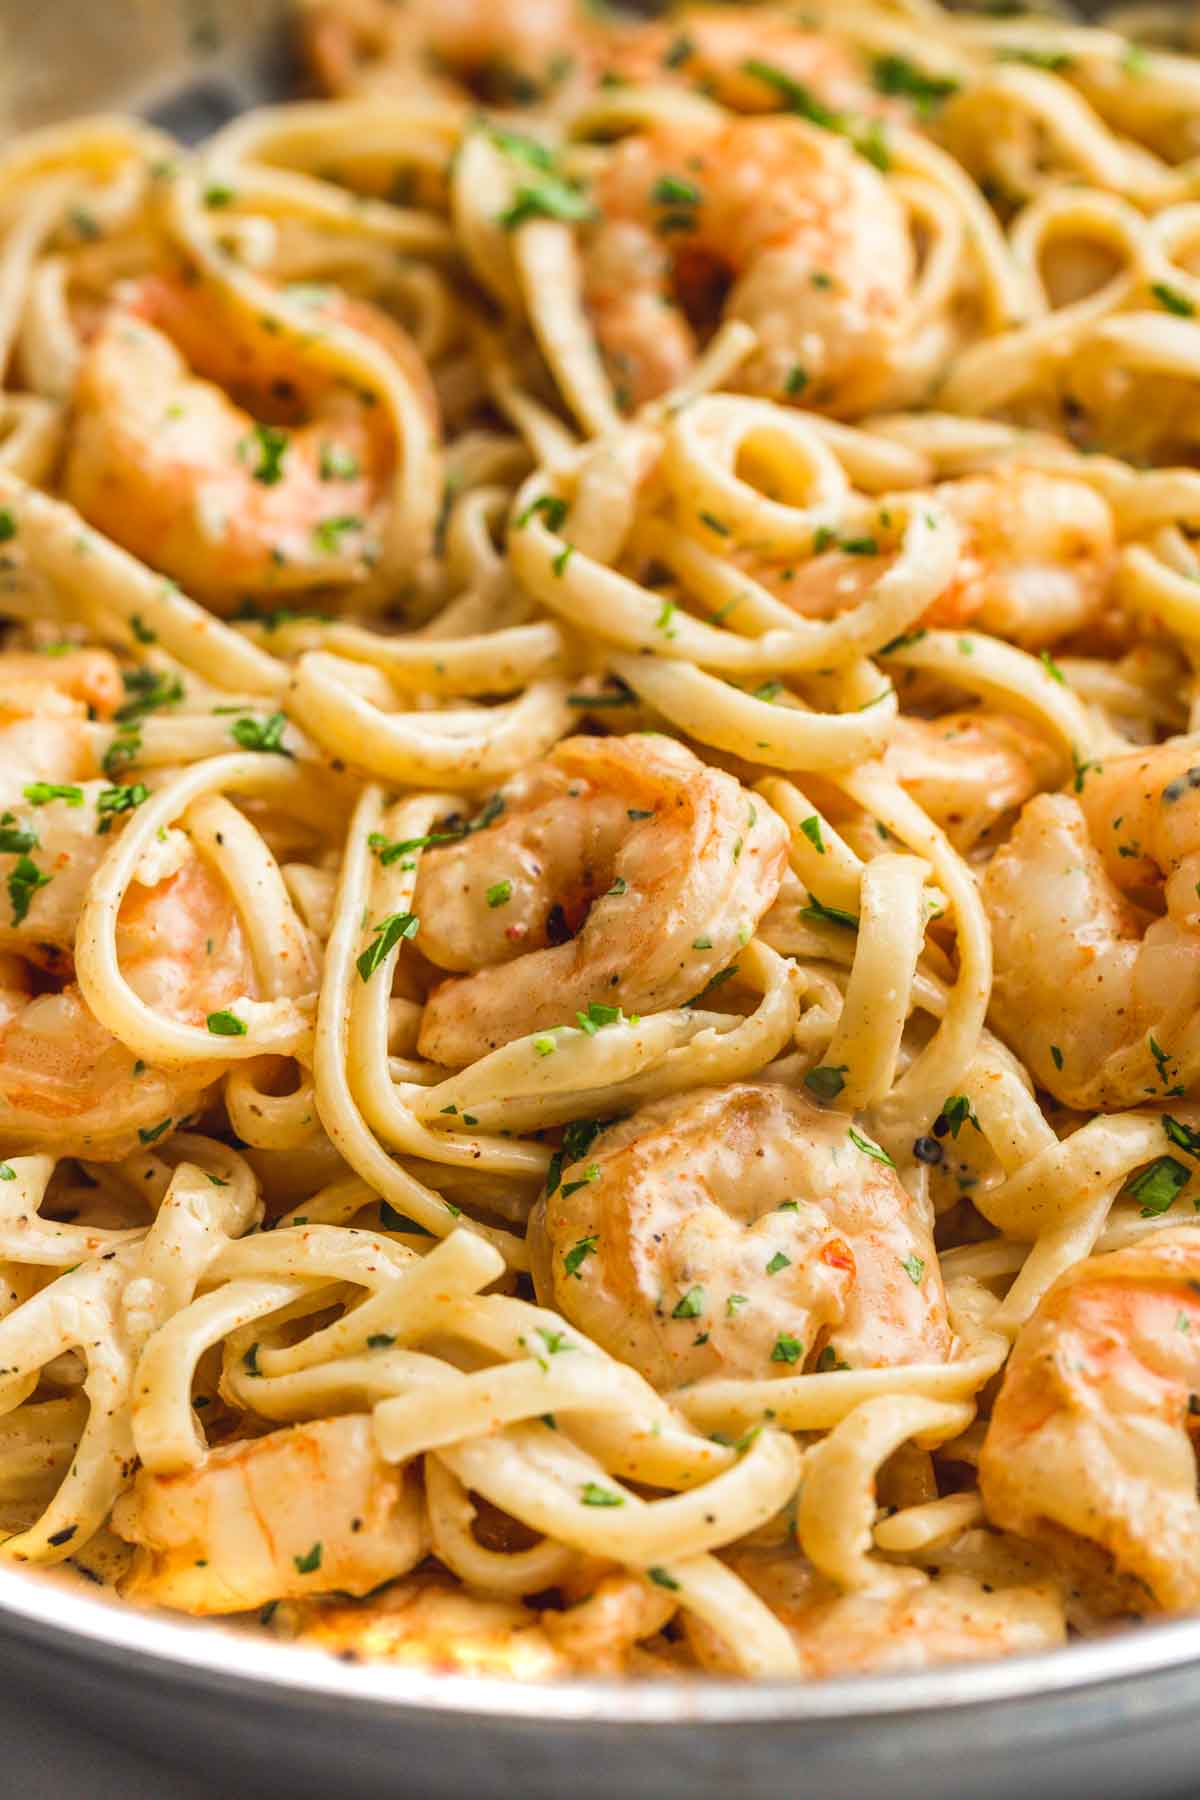 Butter garlic shrimp tossed in creamy rich sauce and pasta, a close up shot.